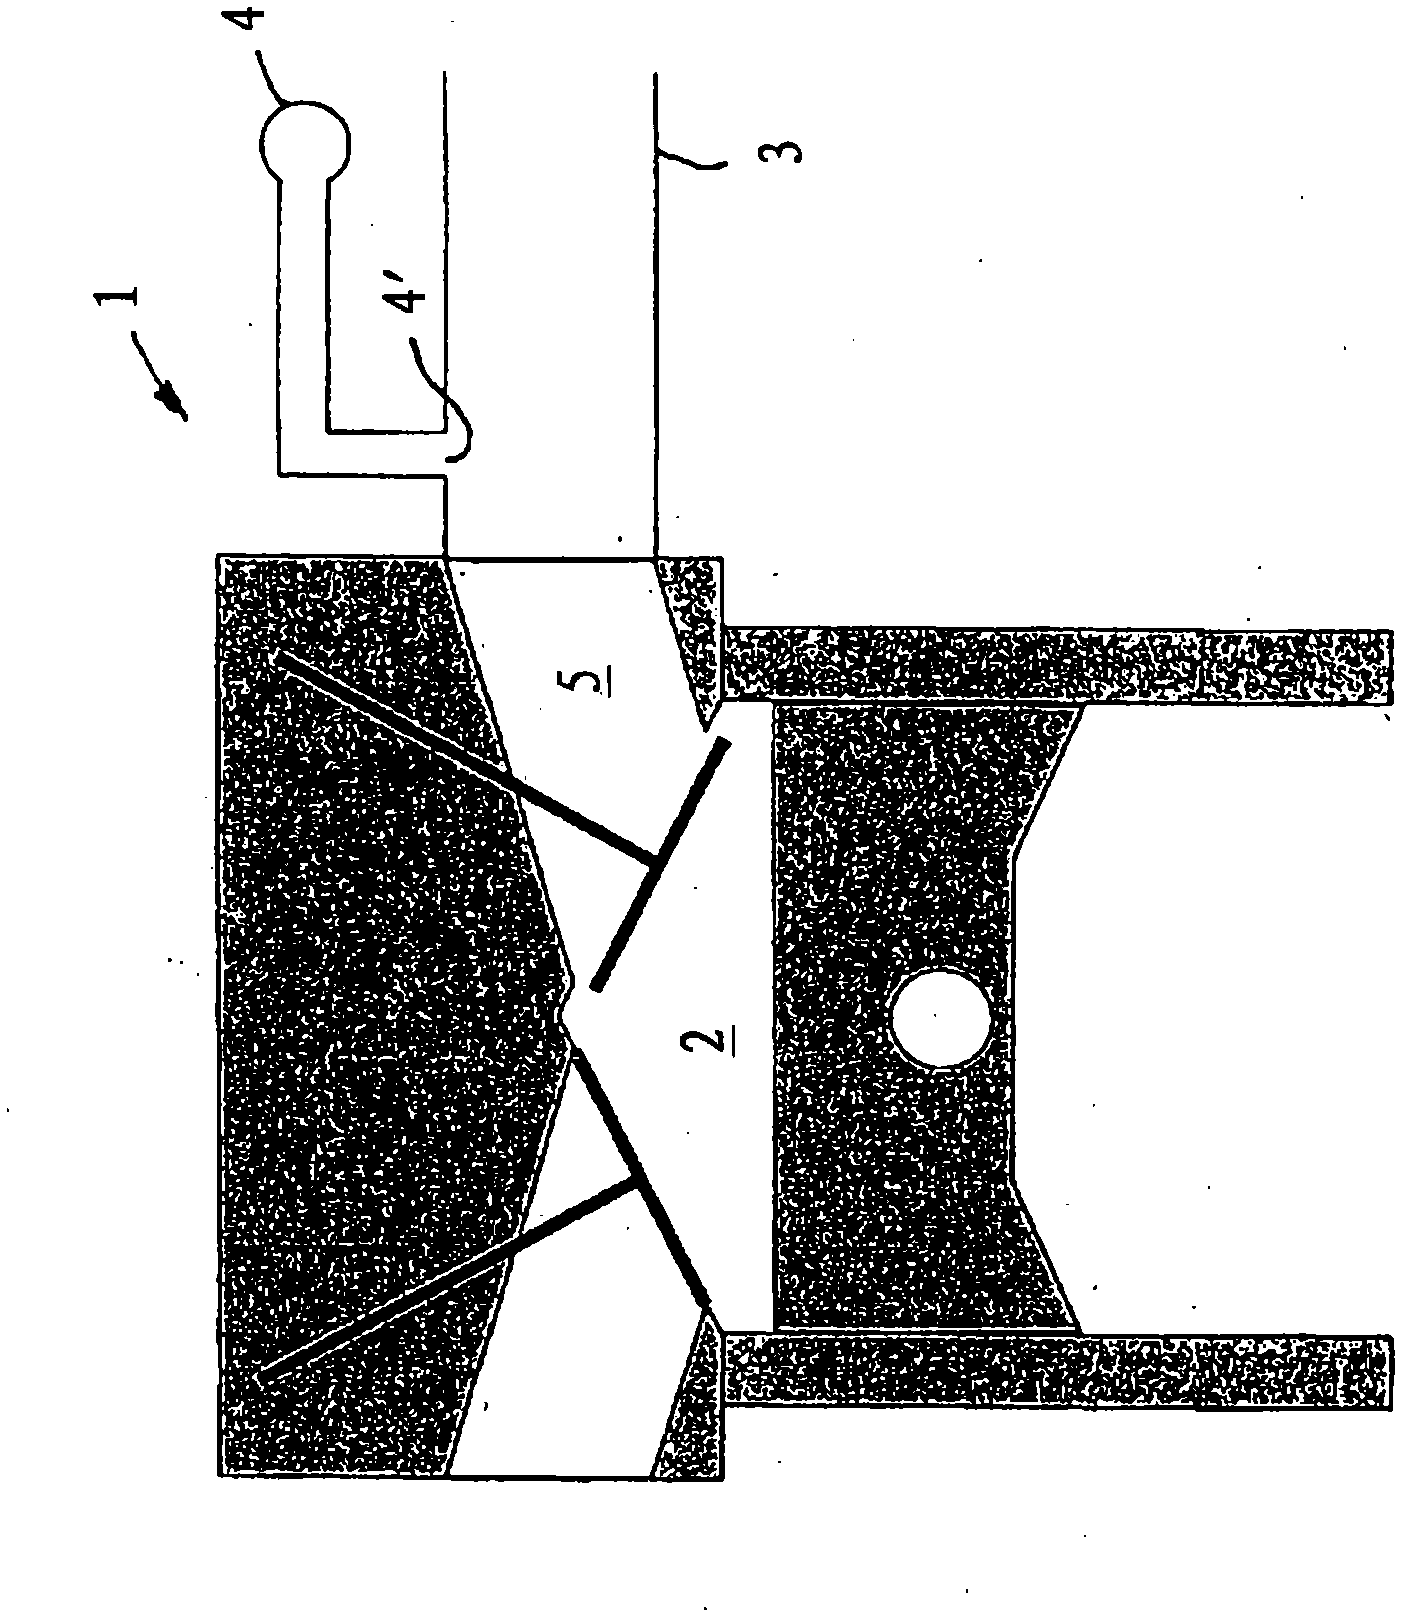 Internal combustion engine having an exhaust gas system